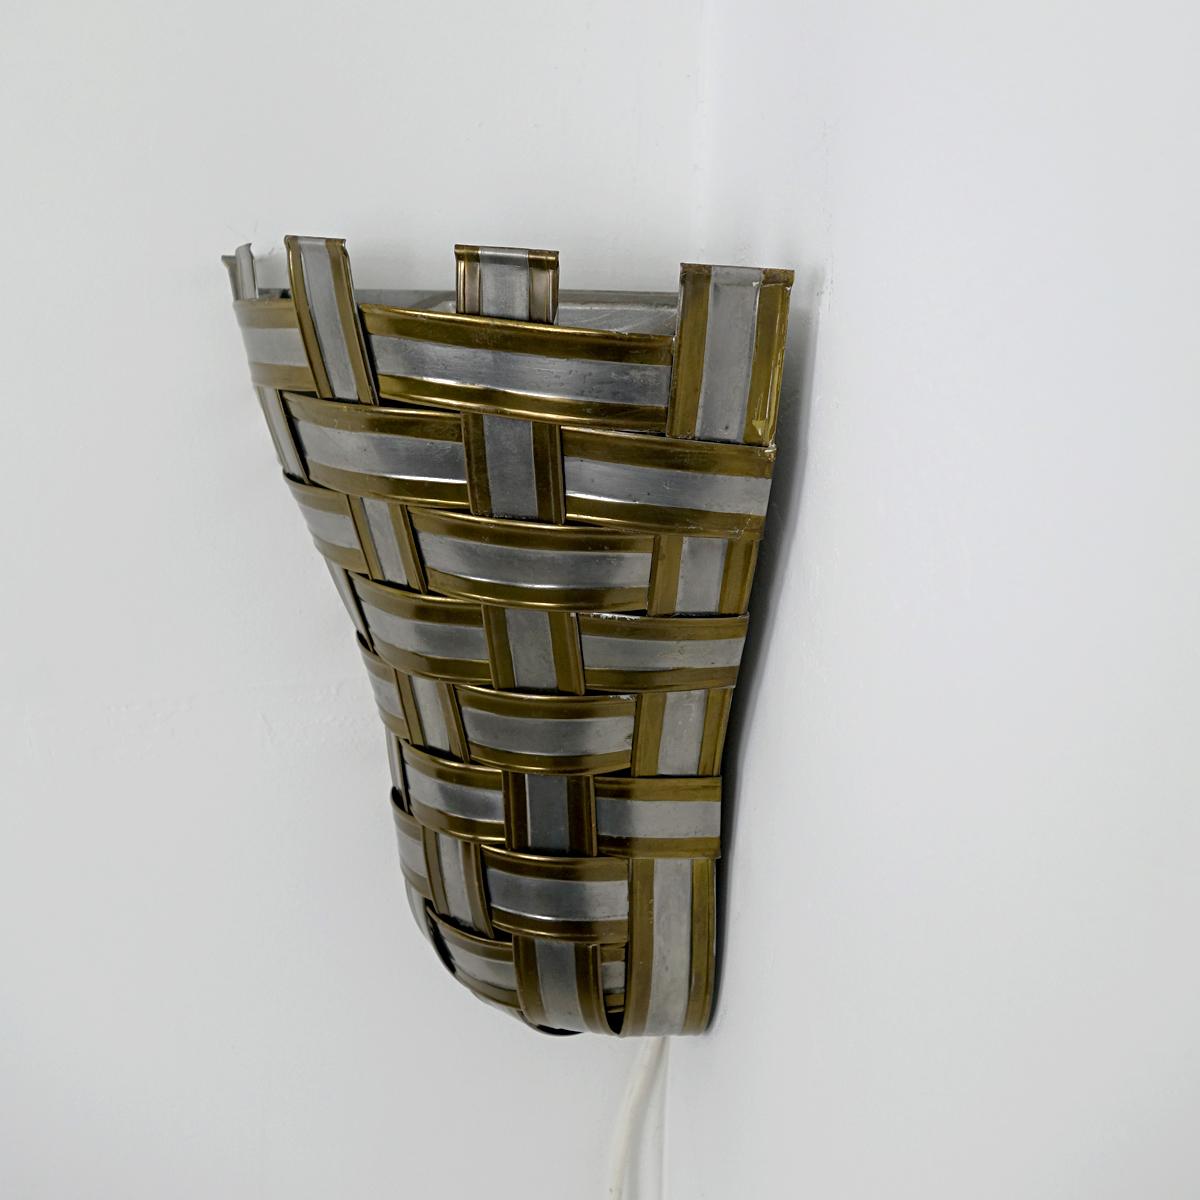 Aluminum Set of 4 Hollywood Regency Corner Sconces Made of Interwoven Aluminium and Brass For Sale